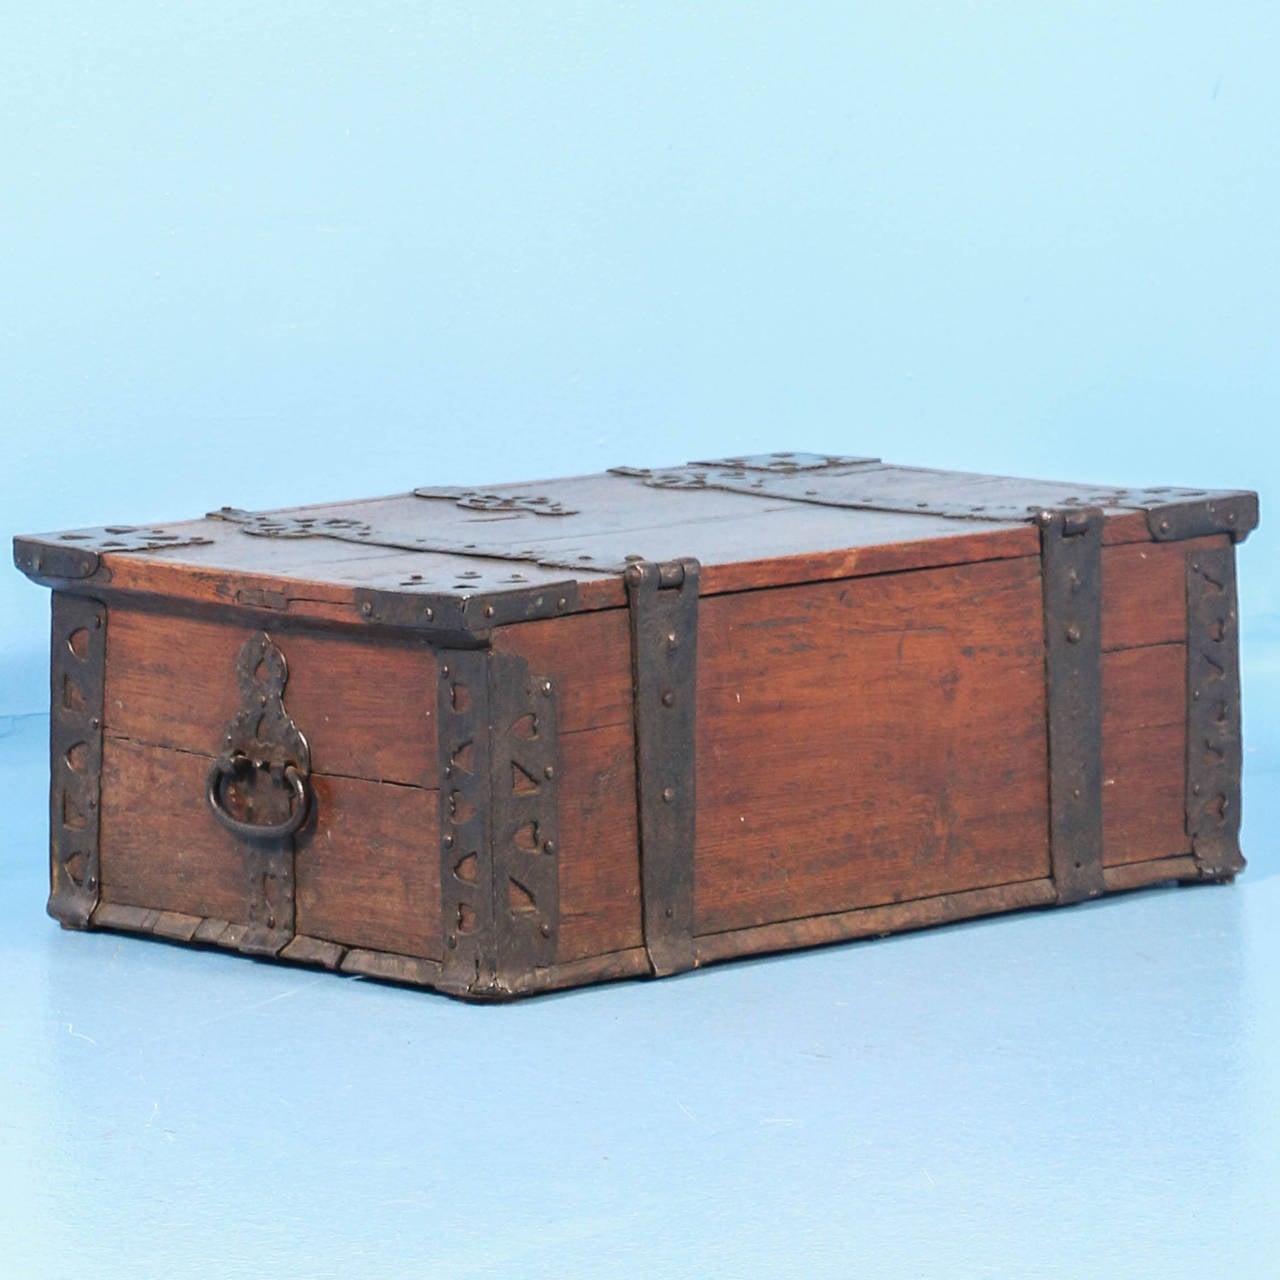 This small trunk or chest is heavily embellished with hand-wrought iron details, including cut-out of heart patterns. It originally serves as a money box to store and lock away valuables. Unique to this oak trunk is the original painted